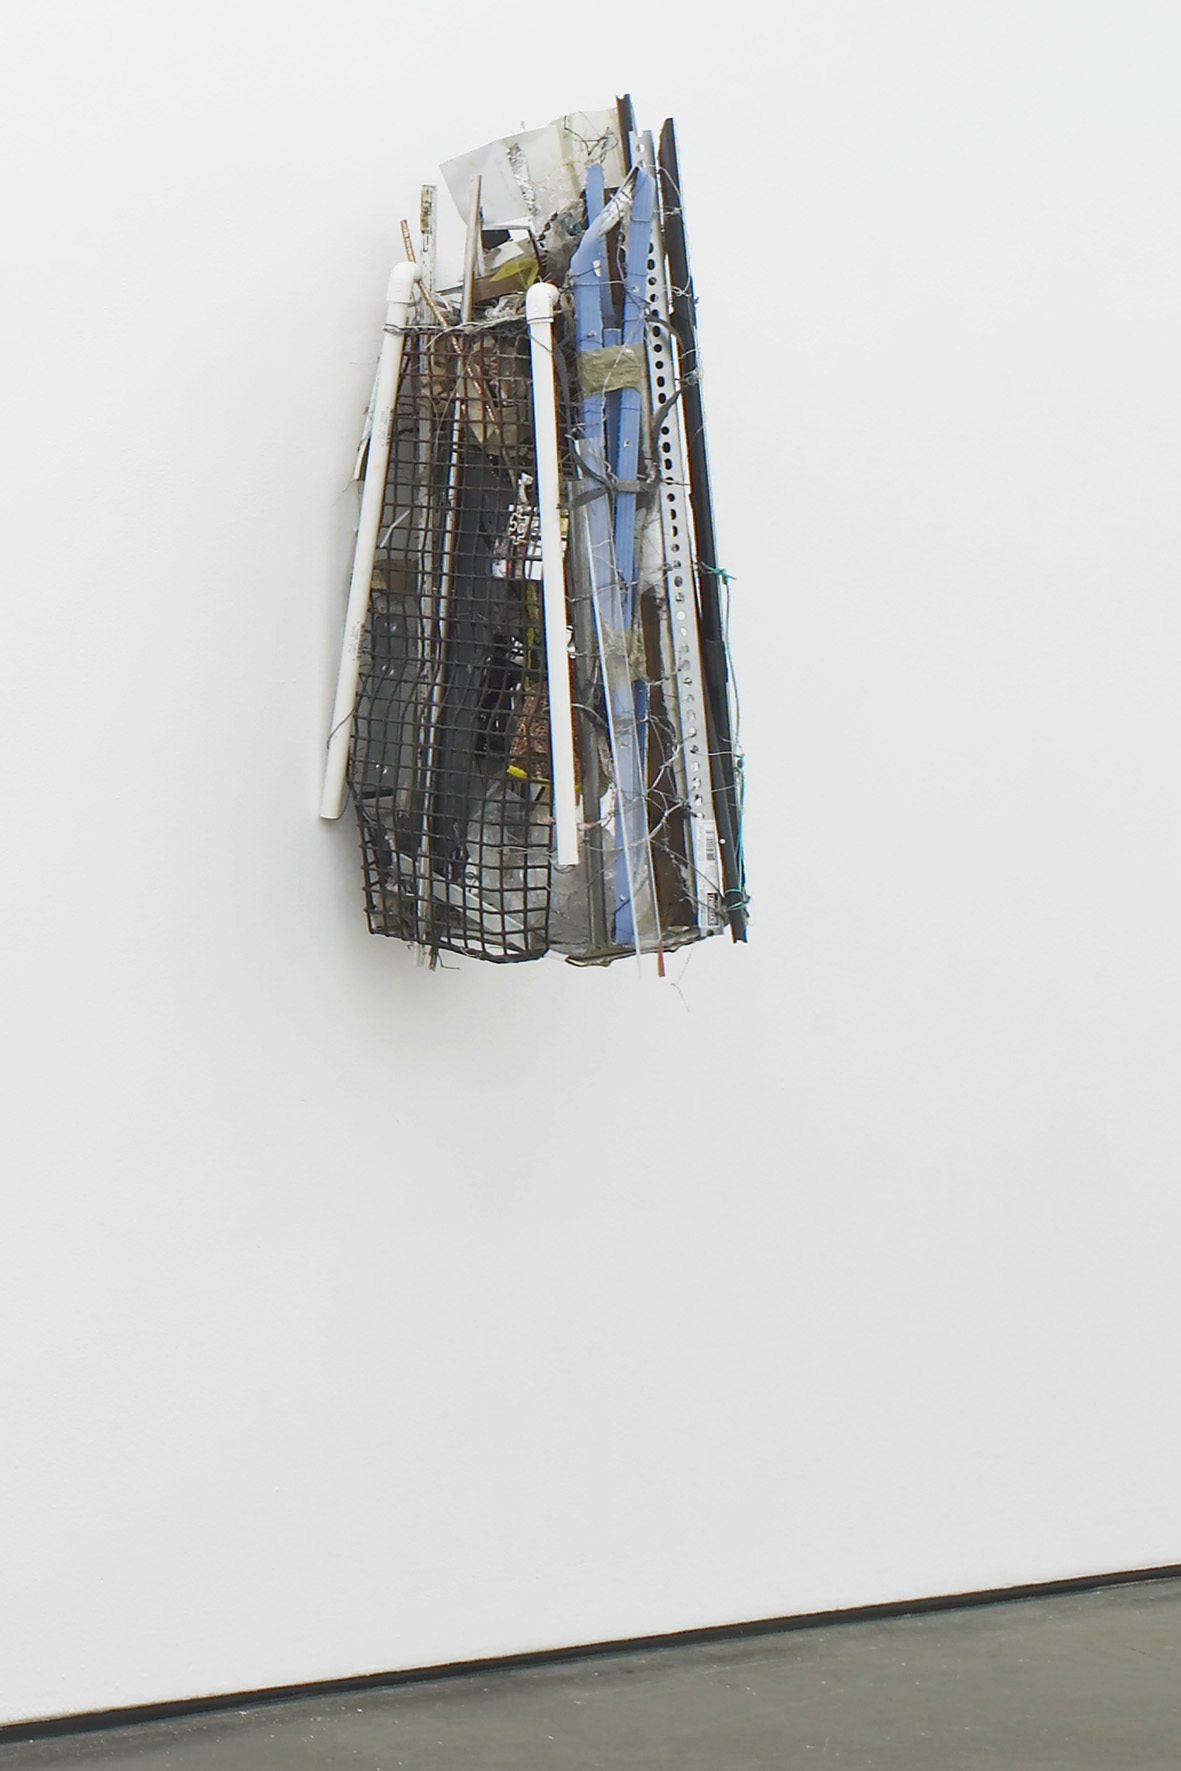     Robert Bittenbender Nocturnal Digest 2015 Wood, steel, photographs, aluminium, plastic, acrylic glass, jewelry, rubber, rope, paper, clothespins, zipties, metal wires, chains, assorted tubes, bottles 97 x 29 x 42 cm / 38.2 x 11.4 x 16.5 in HS12-R